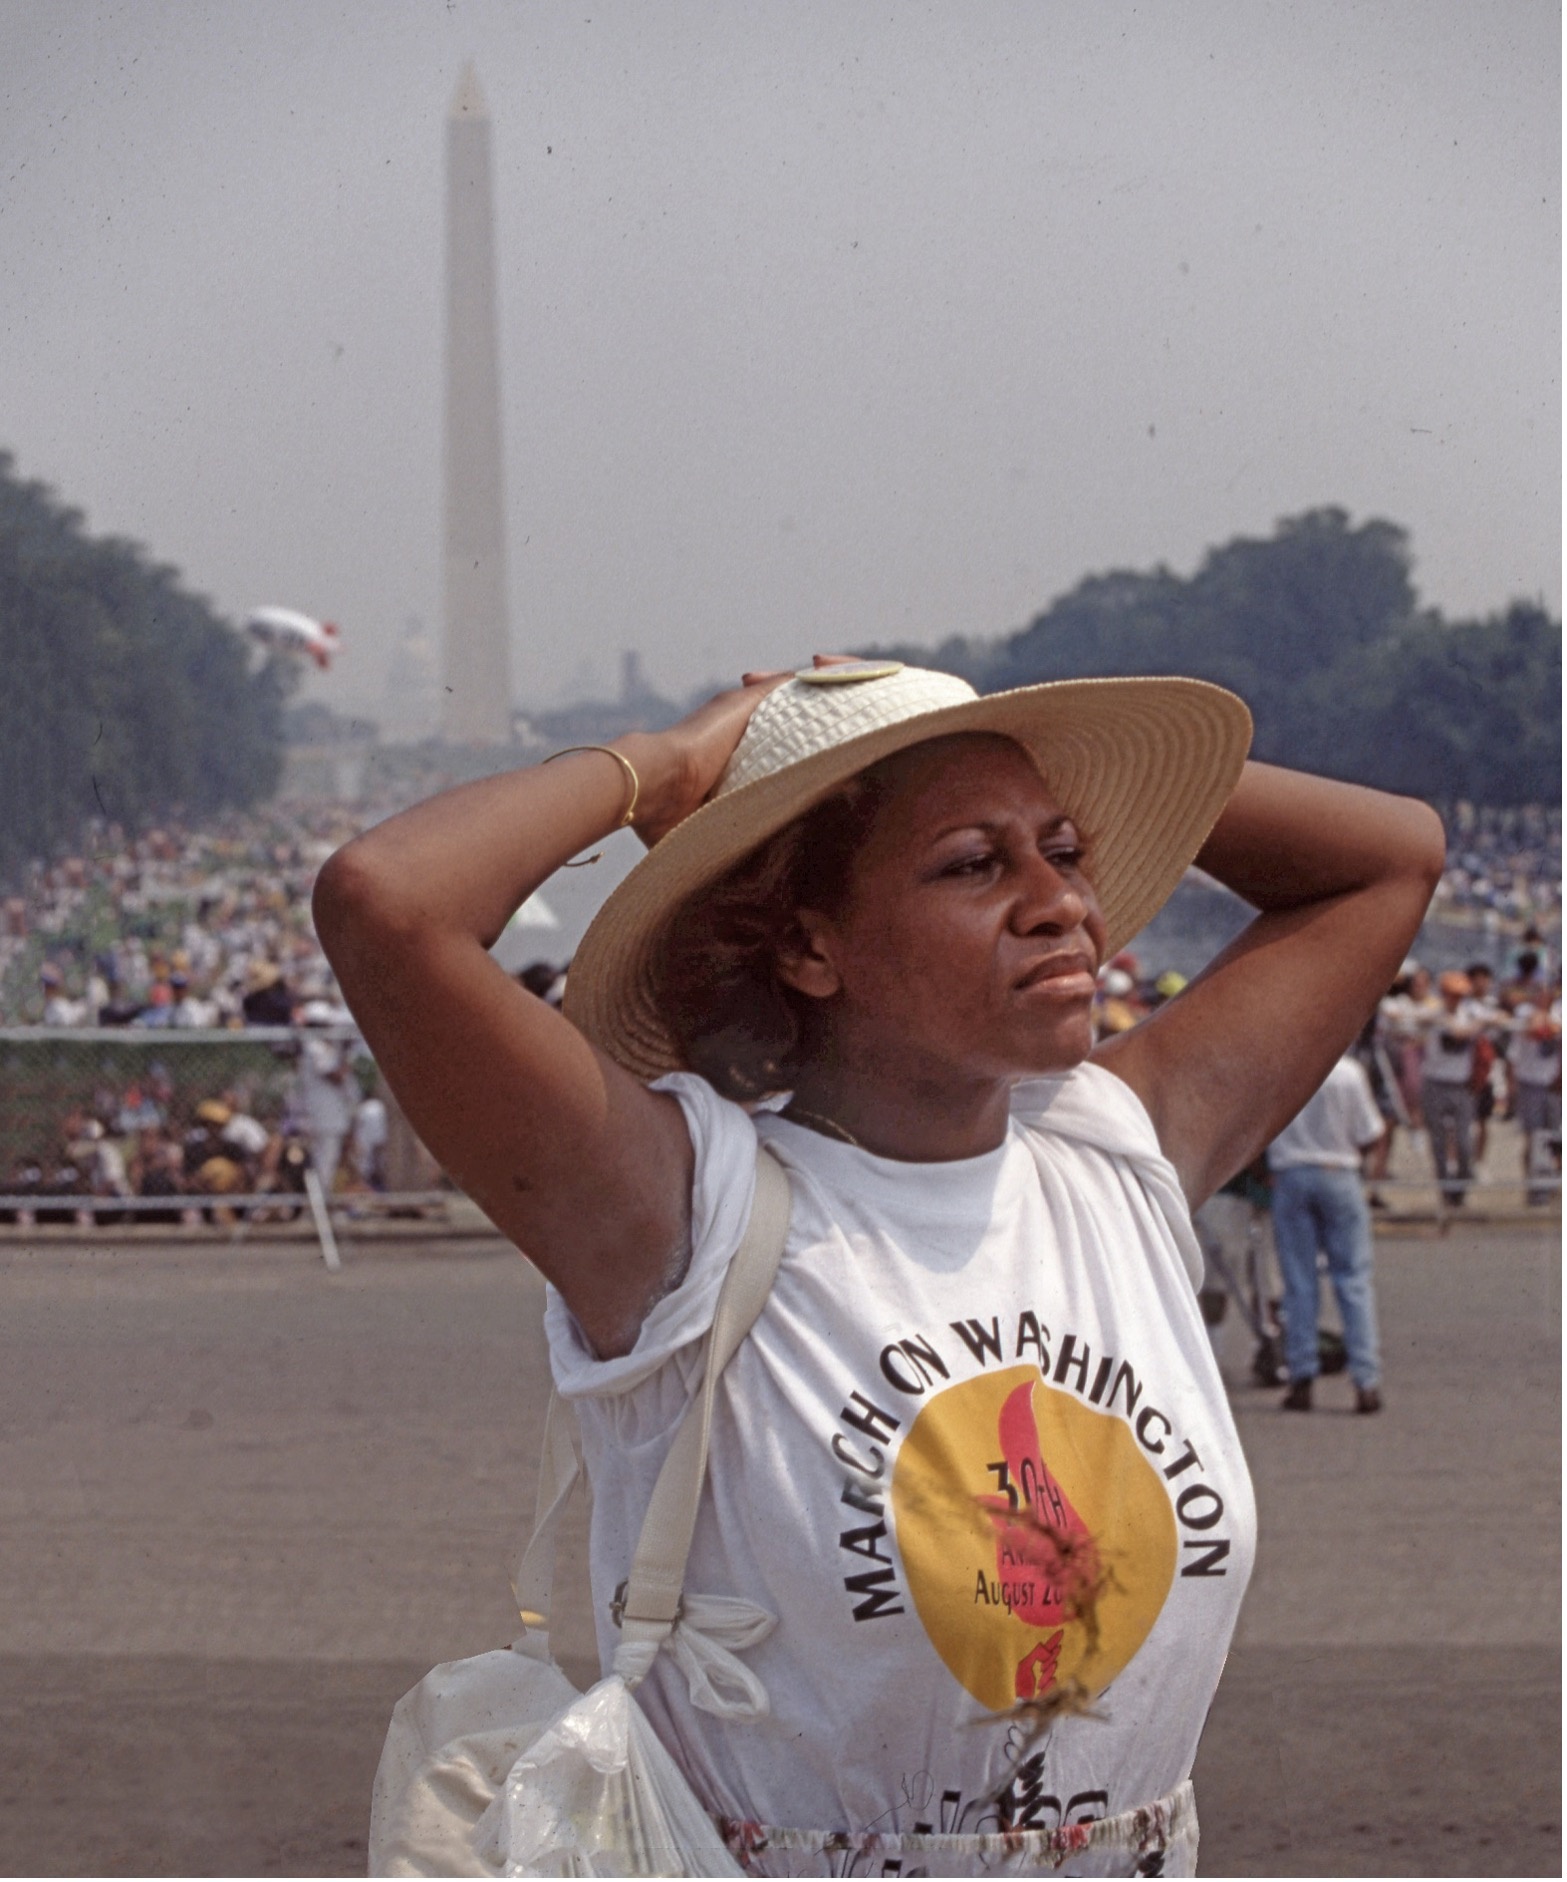 Photo of Black woman wearing straw hat and t-shirt reading "March on Washington," with her hands on her head looking away from the camera, standing in front of the Washington Monument